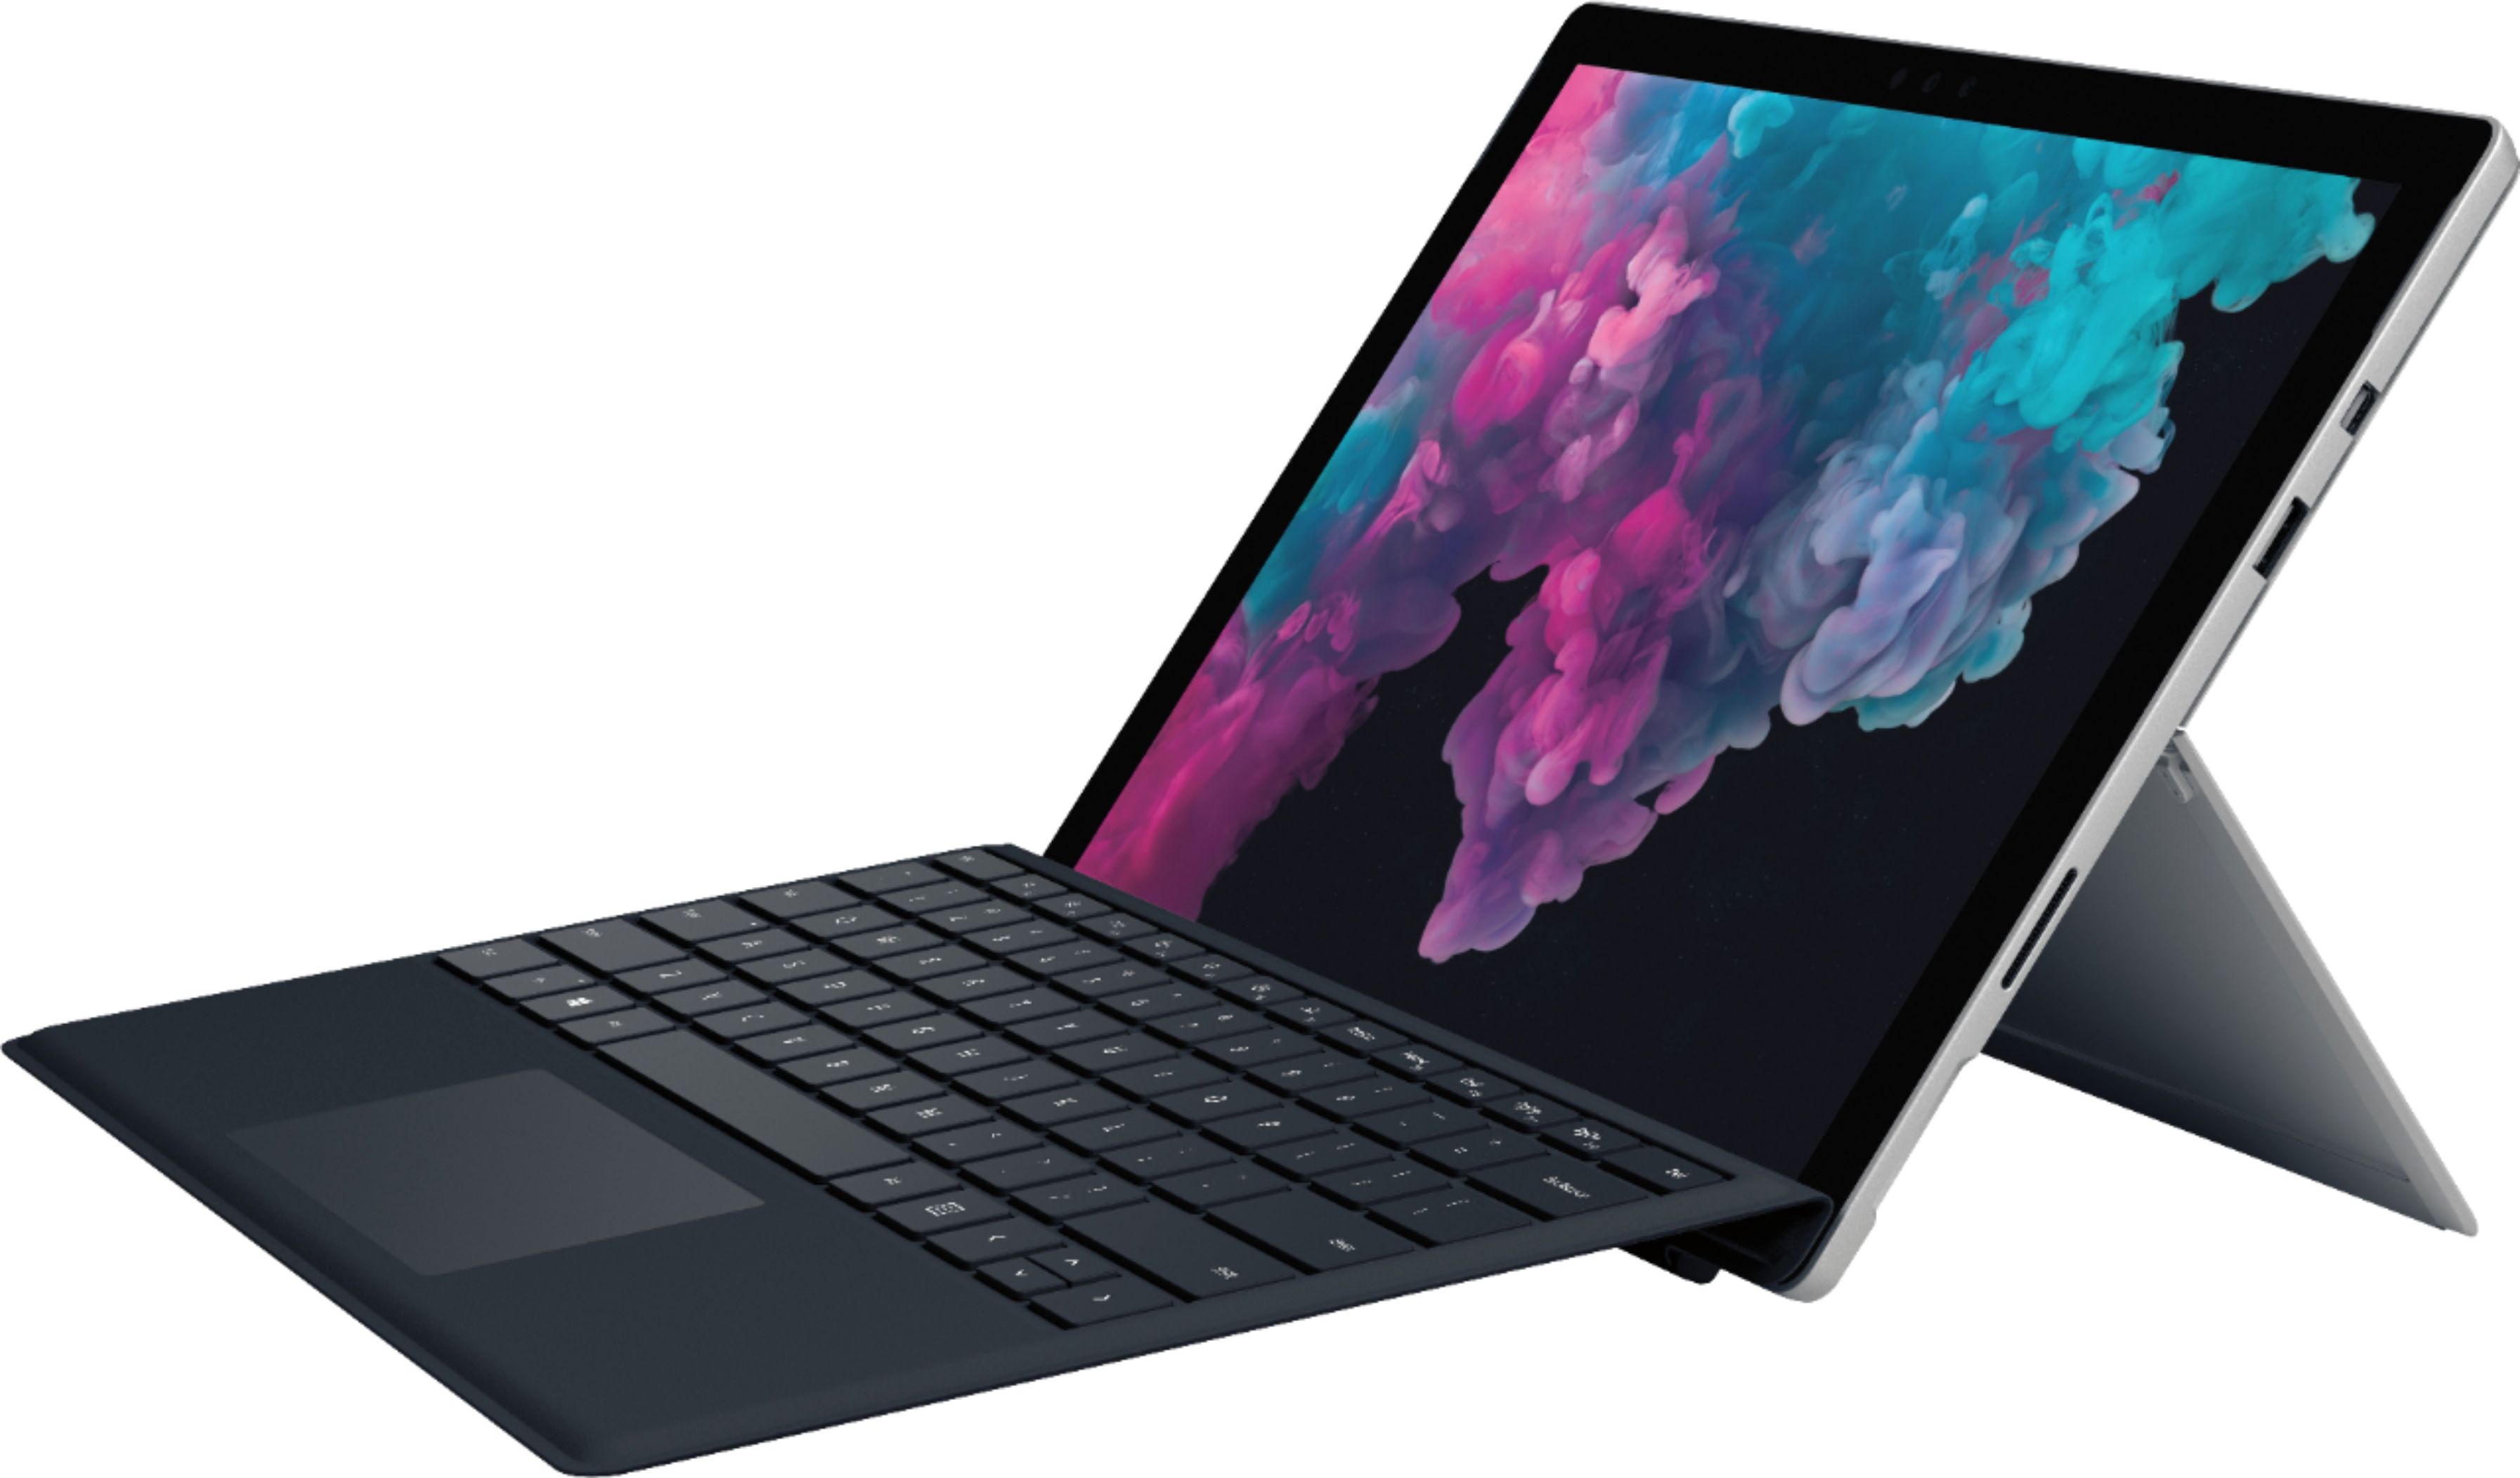 Microsoft - Surface Pro with Black Keyboard - 12.3" Touch Screen - Intel Core M3 - 4GB Memory - 128GB Solid State Drive - Platinum